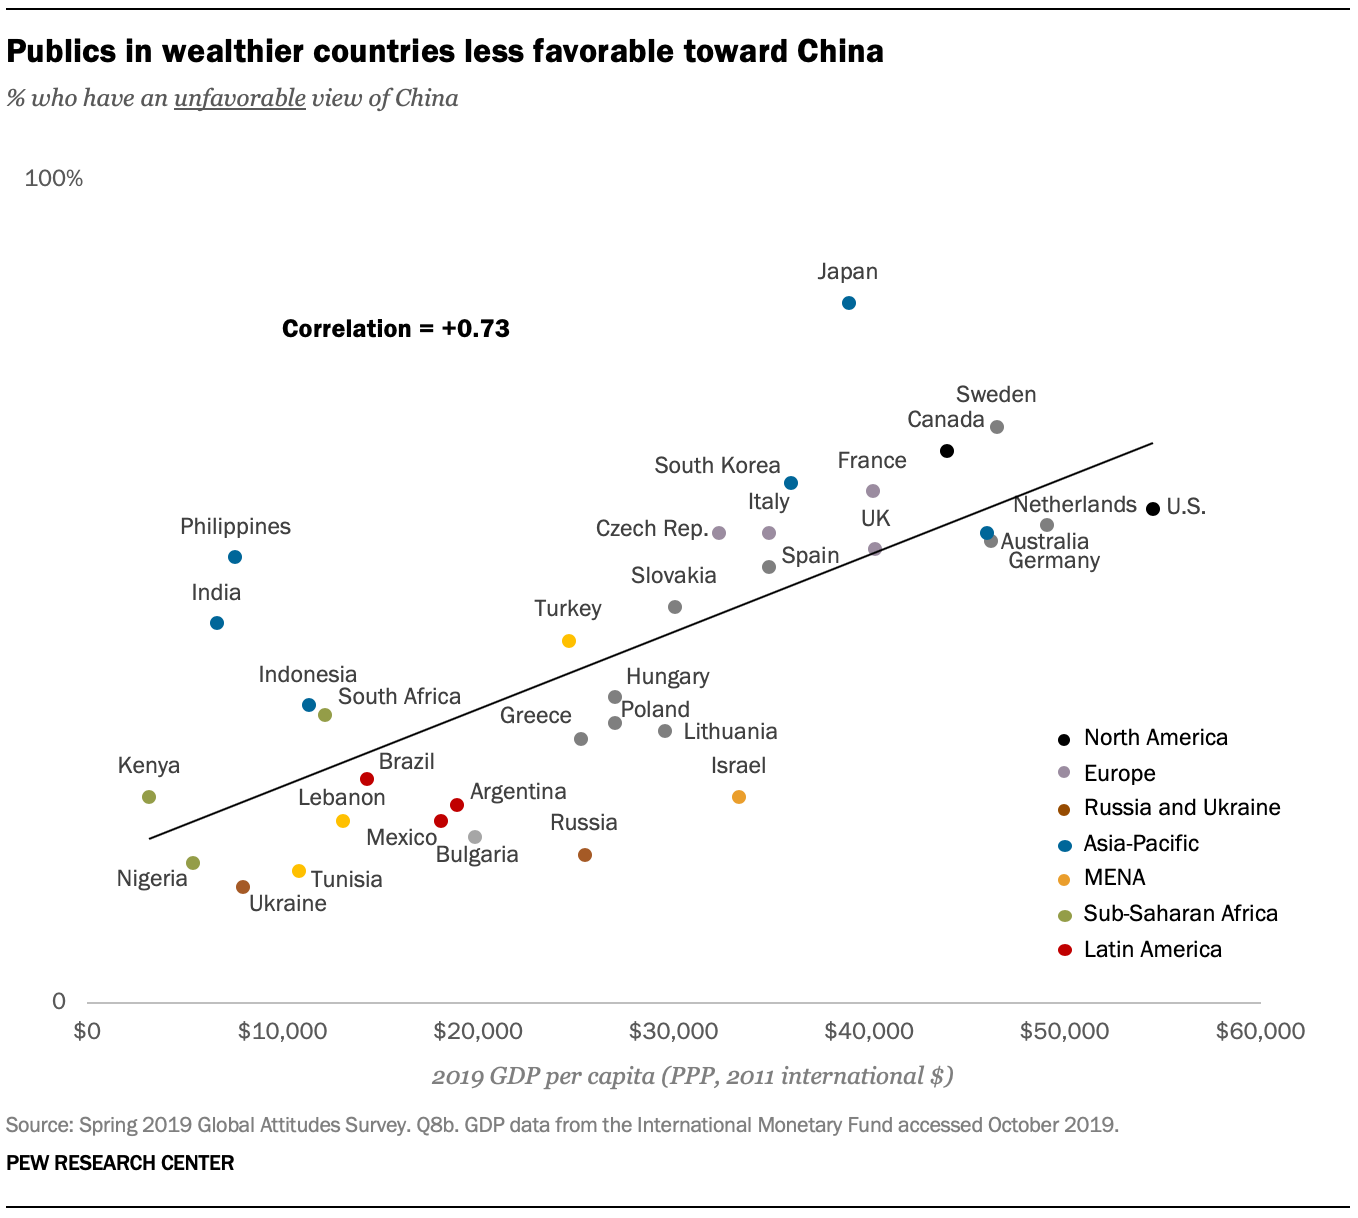 A chart showing publics in wealthier countries less favorable toward China